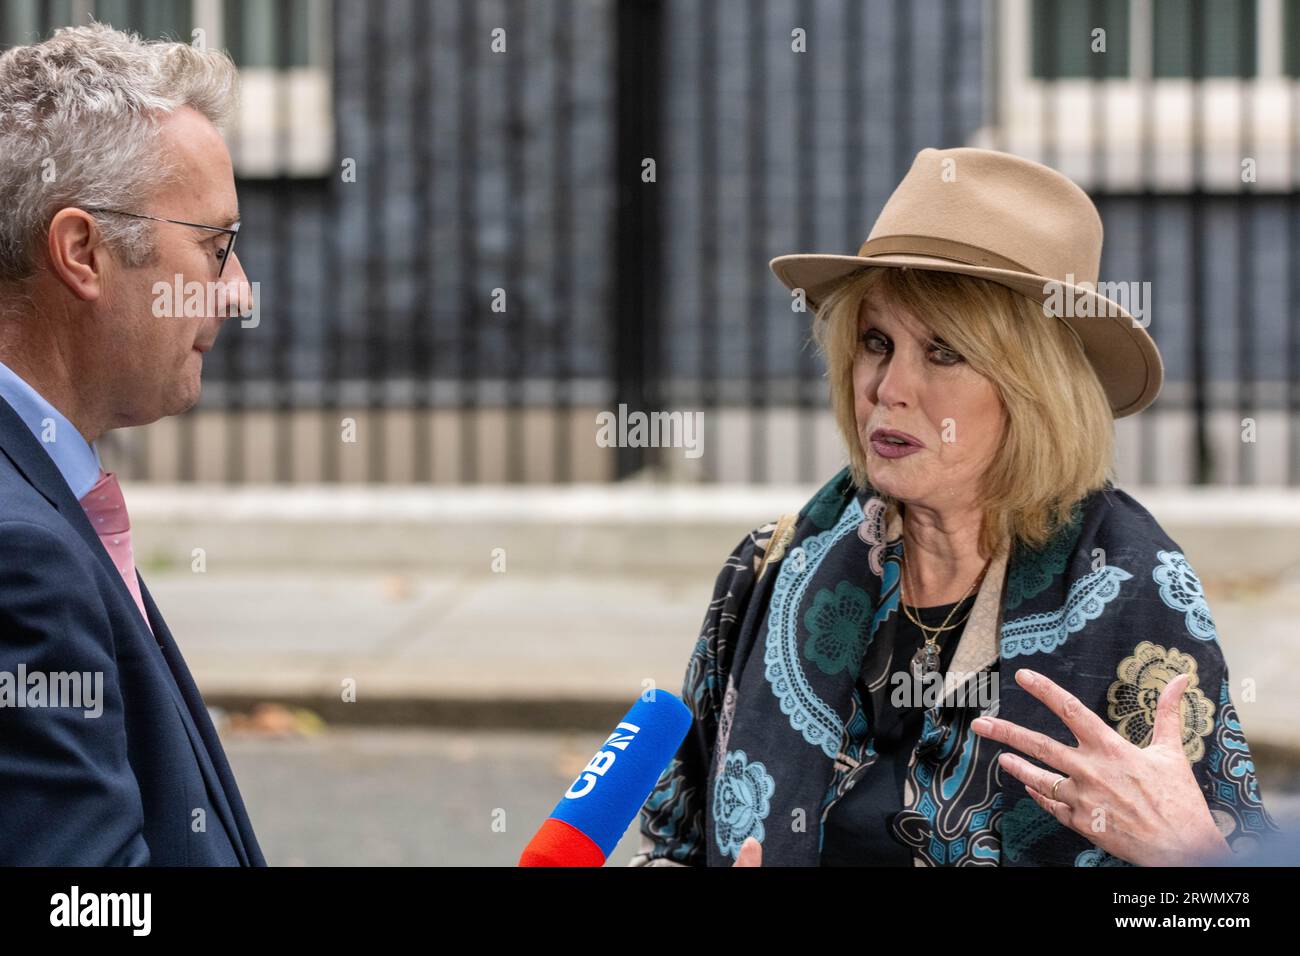 London, UK. 20th Sep, 2023. Dame Joanna Lumley hands in a ban live exports petition to 10 Downing Street London UK Credit: Ian Davidson/Alamy Live News Stock Photo